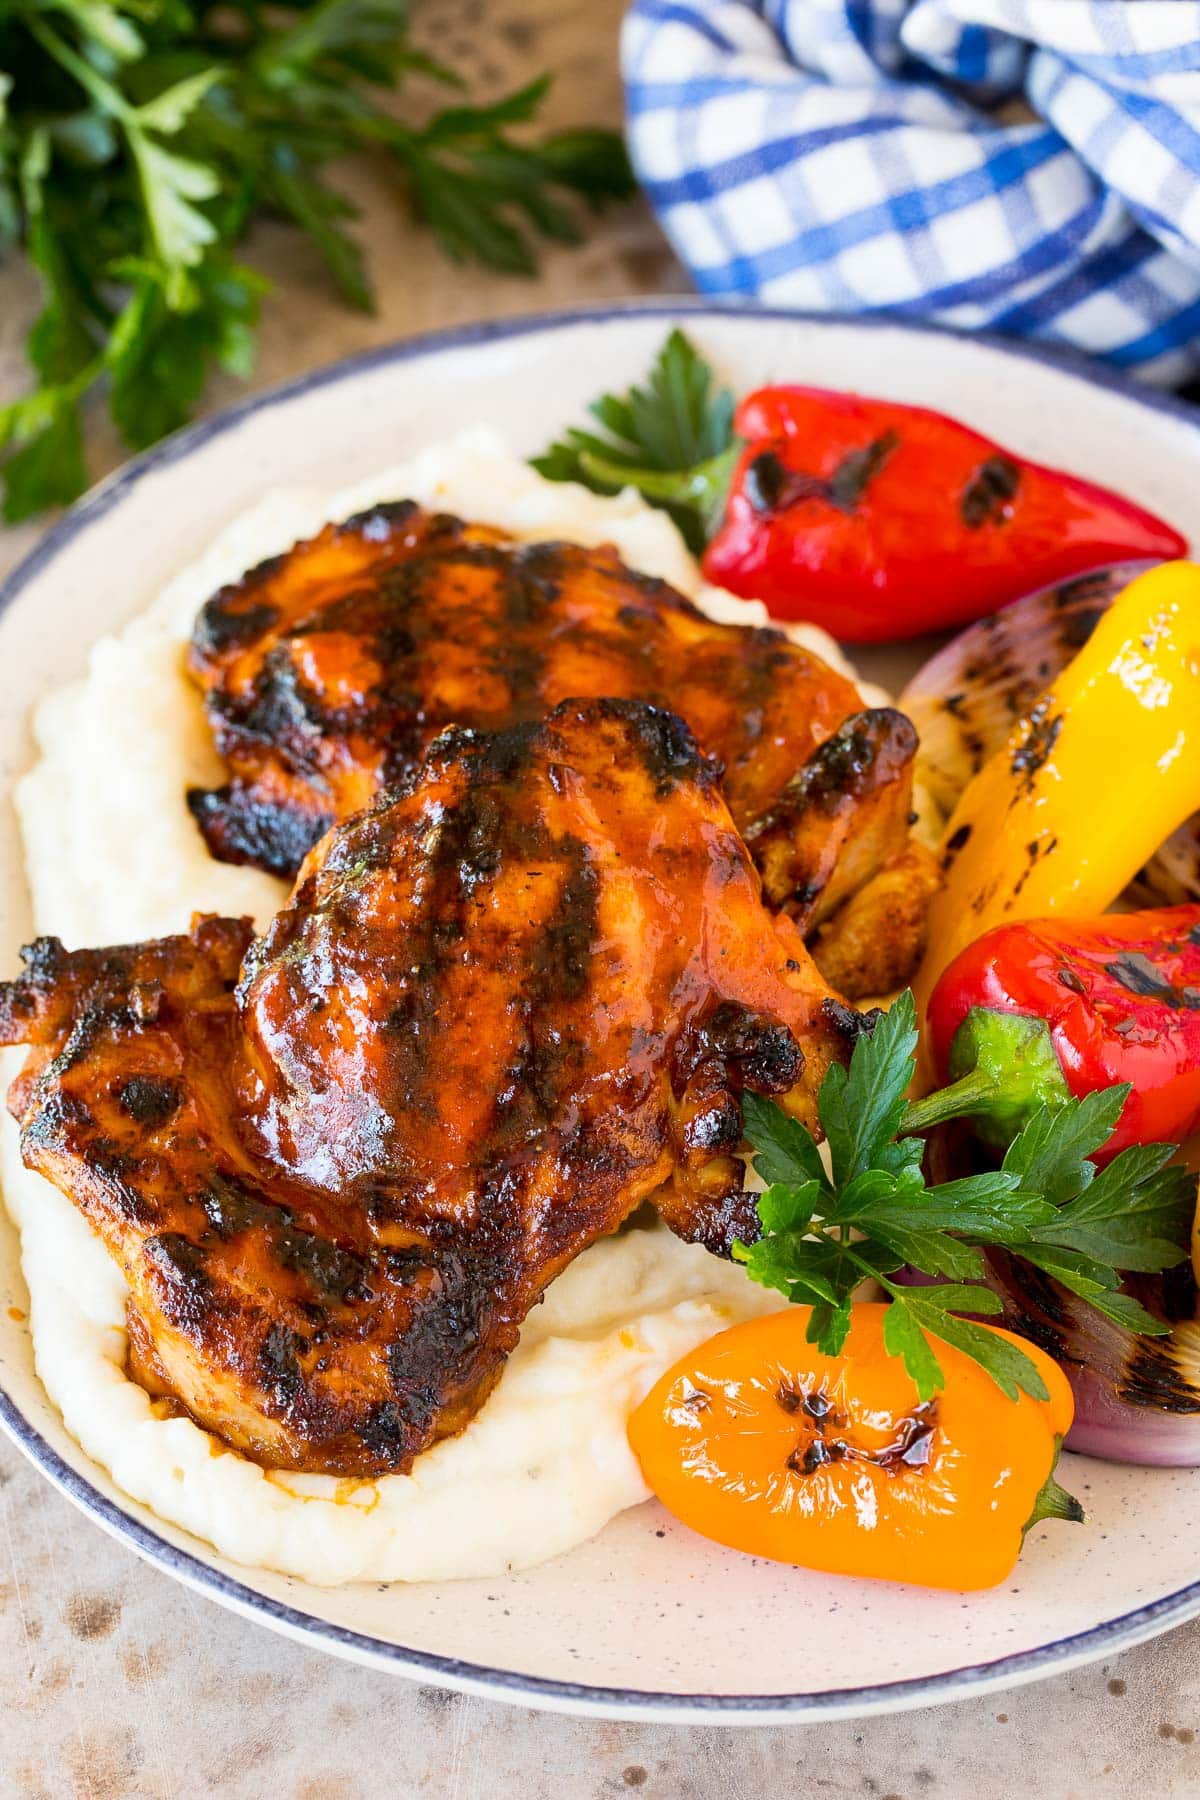 Thighs coated in BBQ chicken marinade grilled and served with mashed potatoes and peppers.